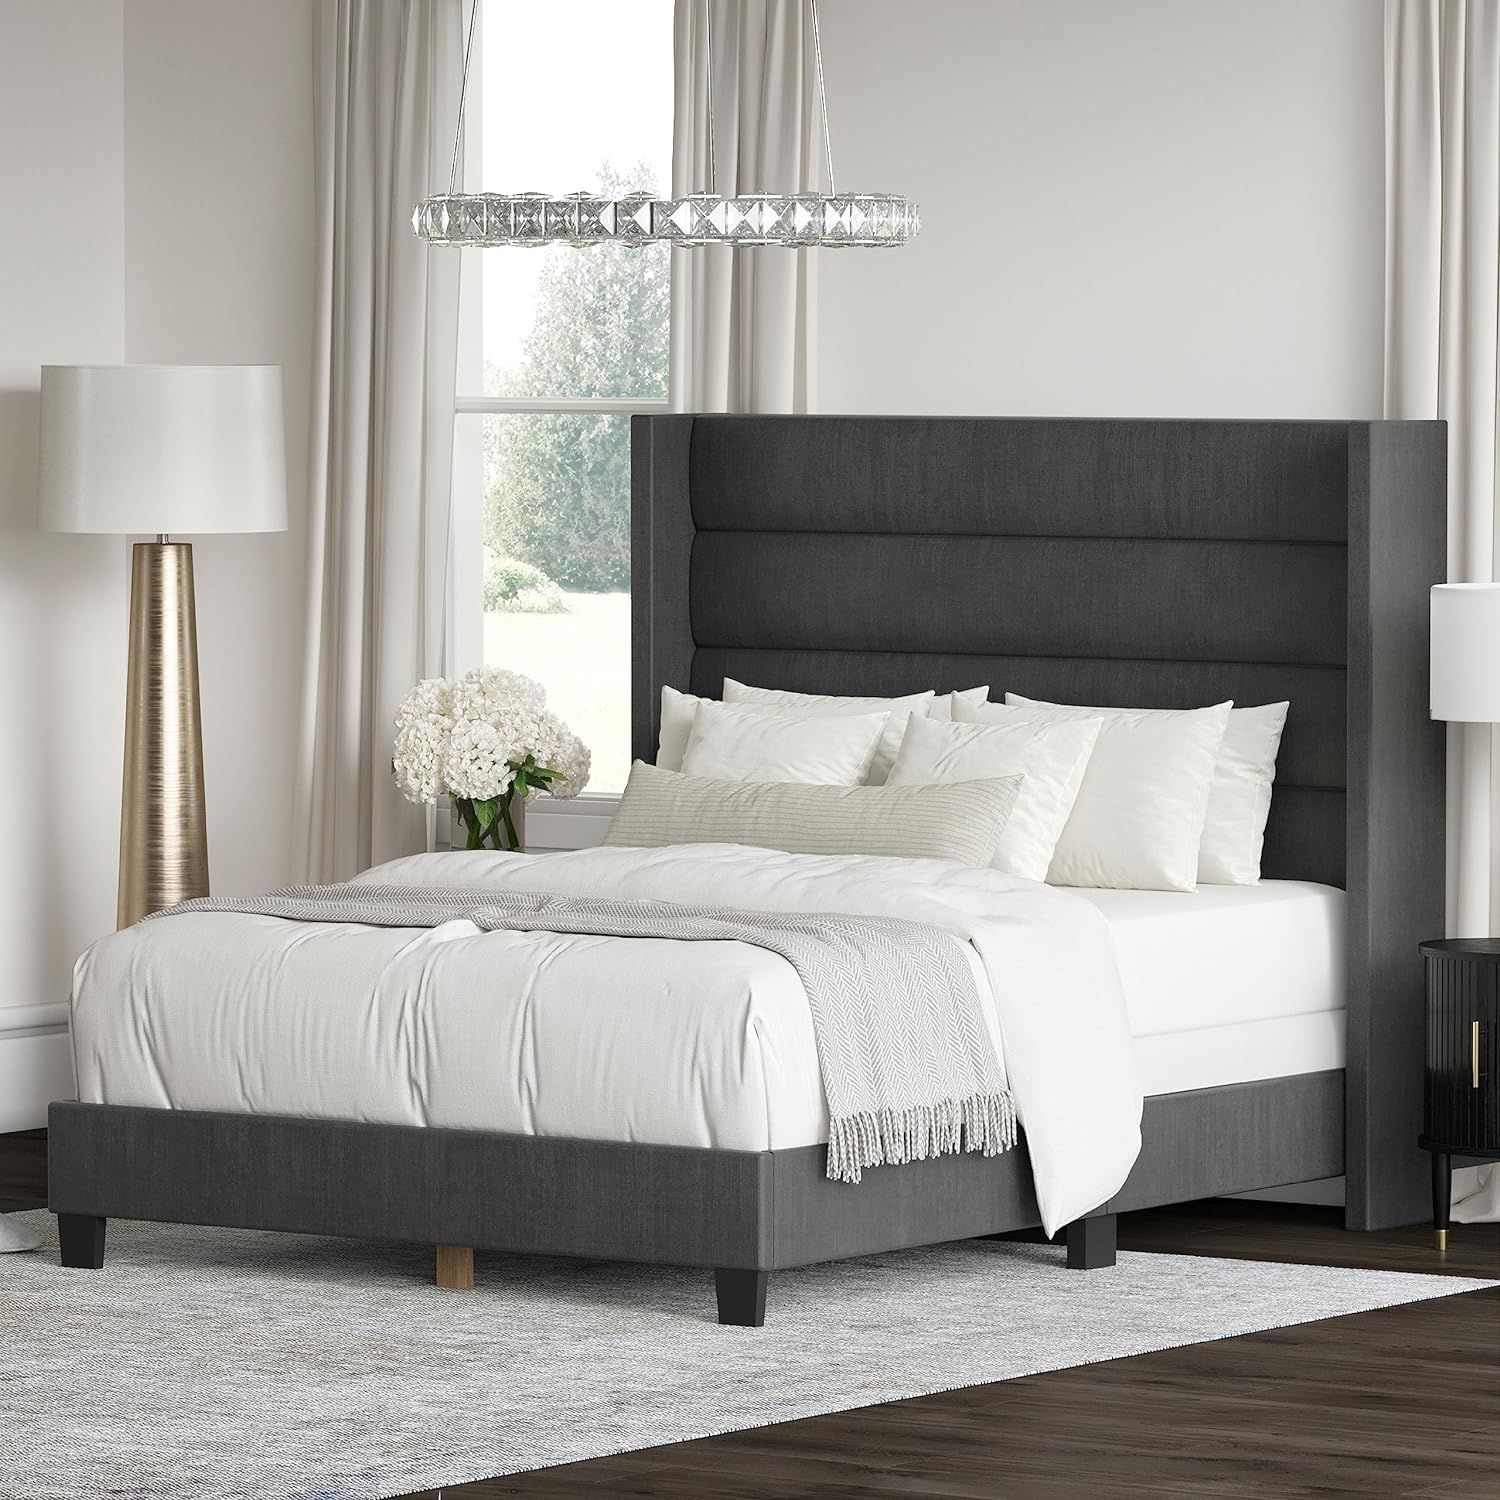 DG Casa George King Bed Frame - Charcoal Fabric Upholstered Panel Bed with Extra Tall Headboard - image 3 of 7